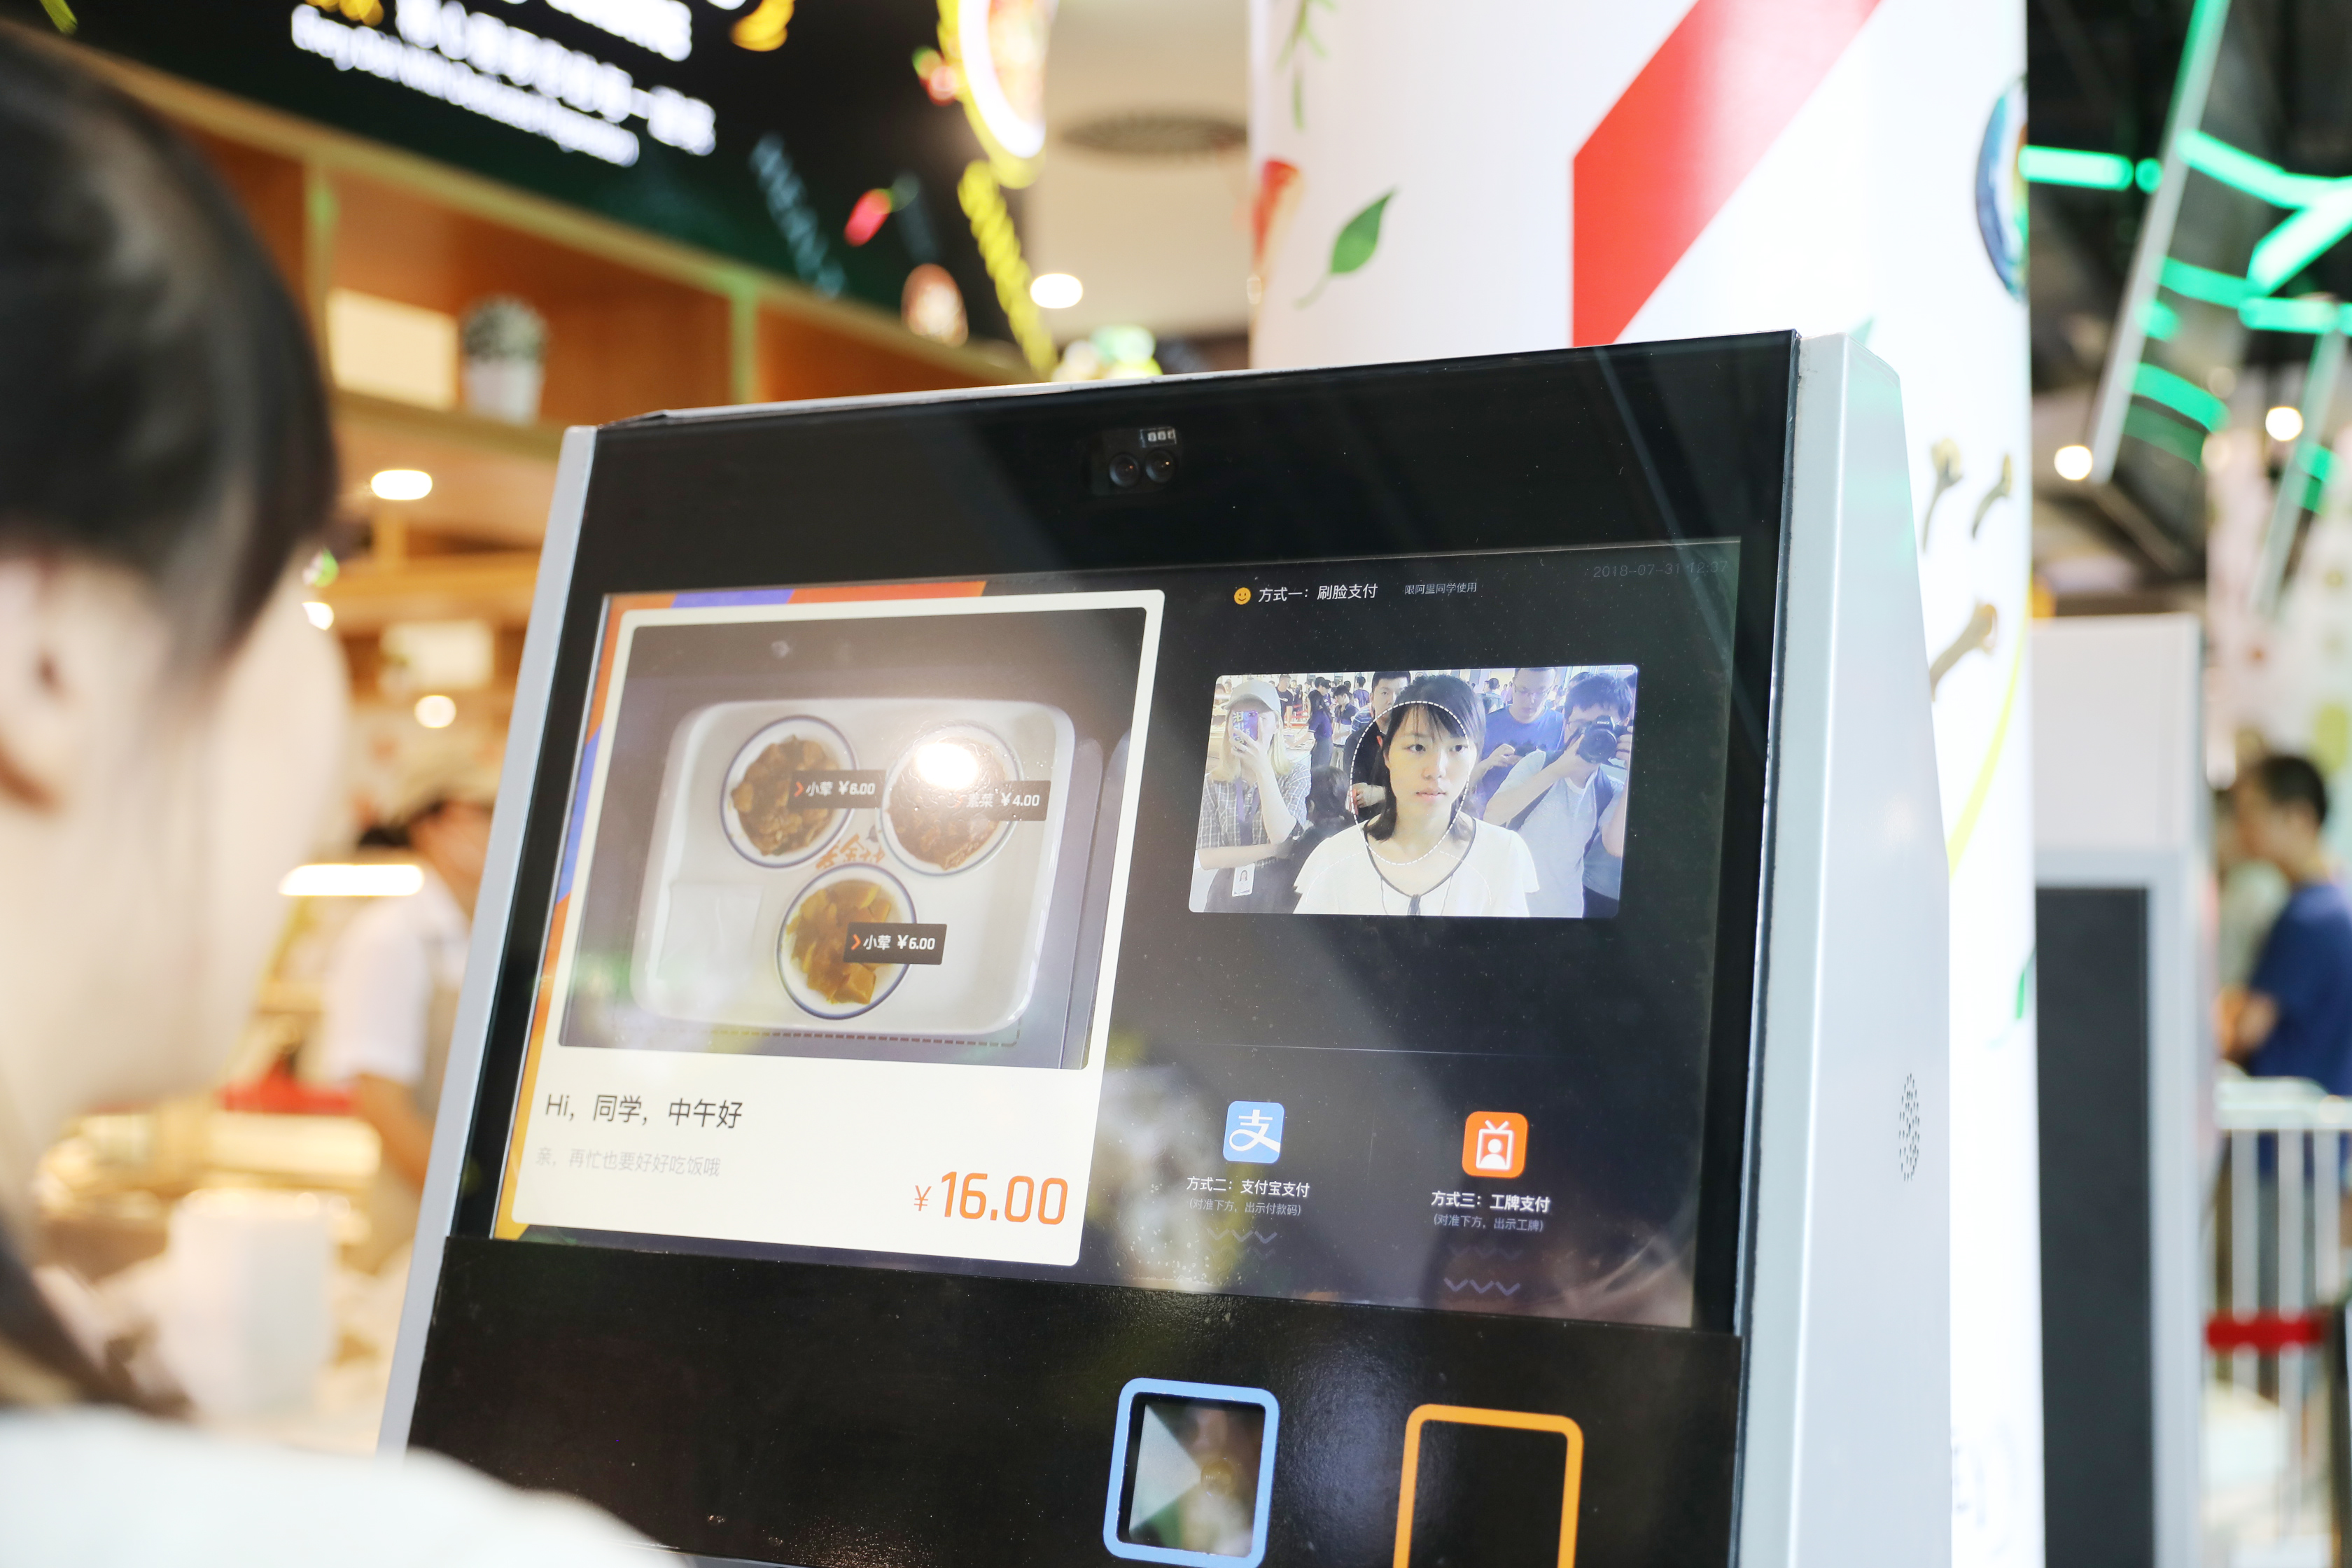 Alibaba Employees Pay For Meals With Face Recognition System